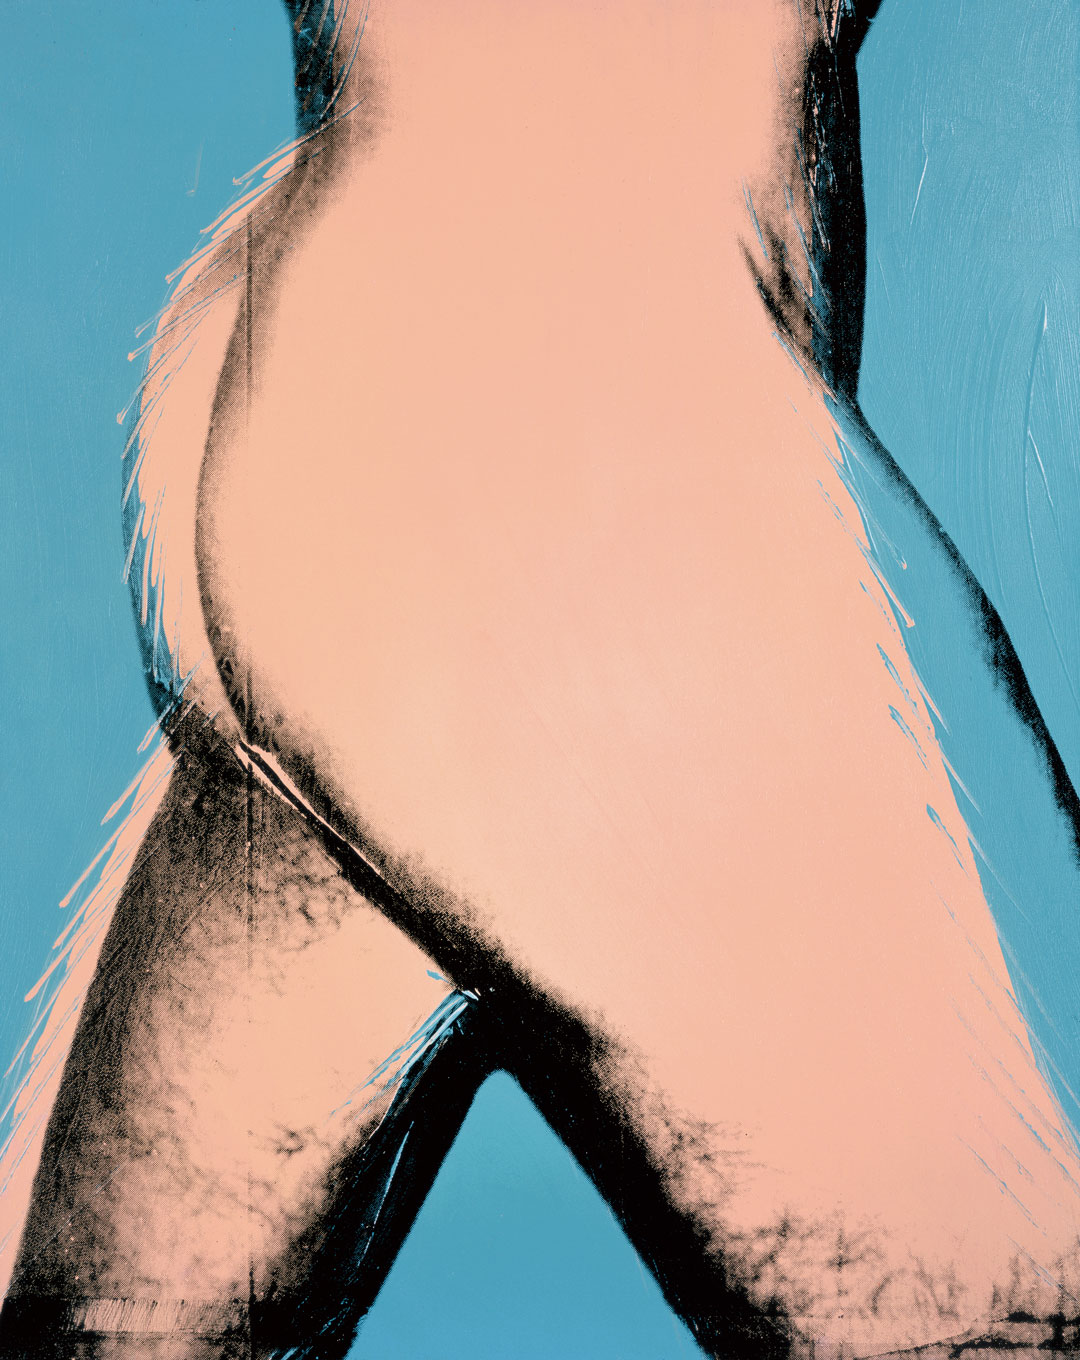 Andy Warhol, Torso (Male Buttocks), mid–late 1977, acrylic and silkscreen ink on linen, 50 x 40 inches, 127 x 101.6 cm. Picture credit: Mugrabi Collection © The Andy Warhol Foundation for the Visual Arts, Inc., NY